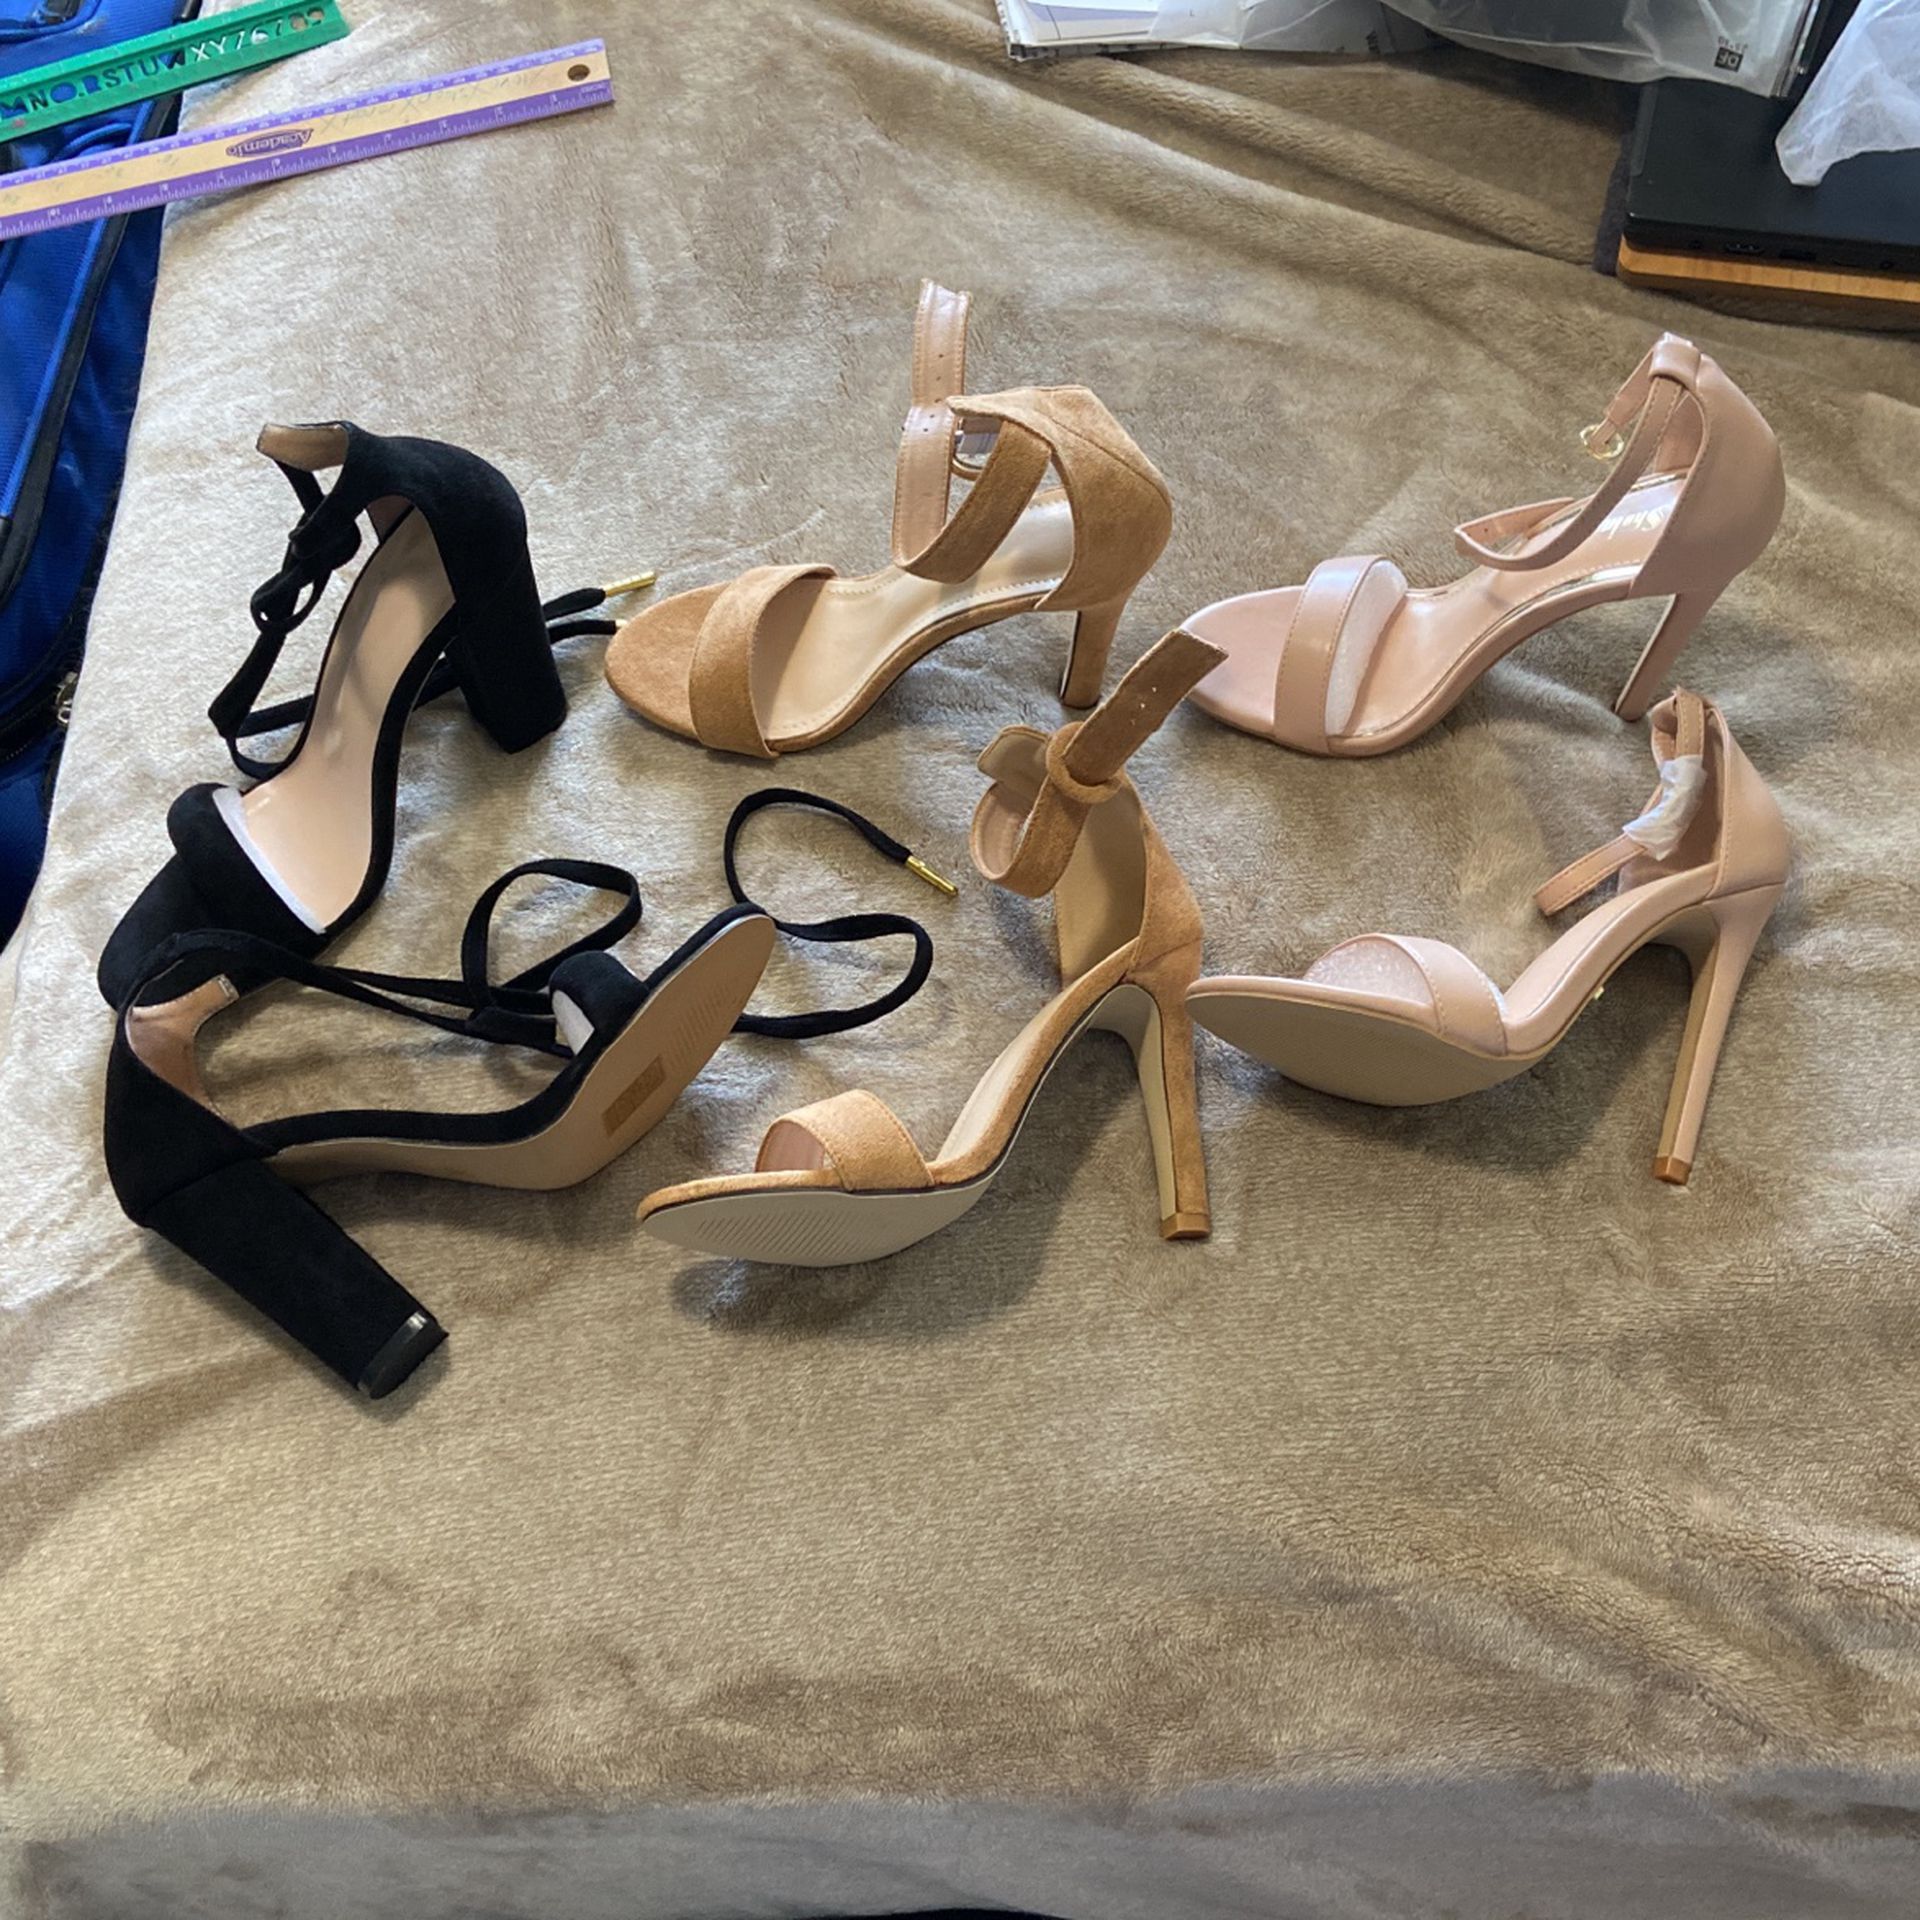 NEW Heels Size 6 (4 Pairs …yes 4)